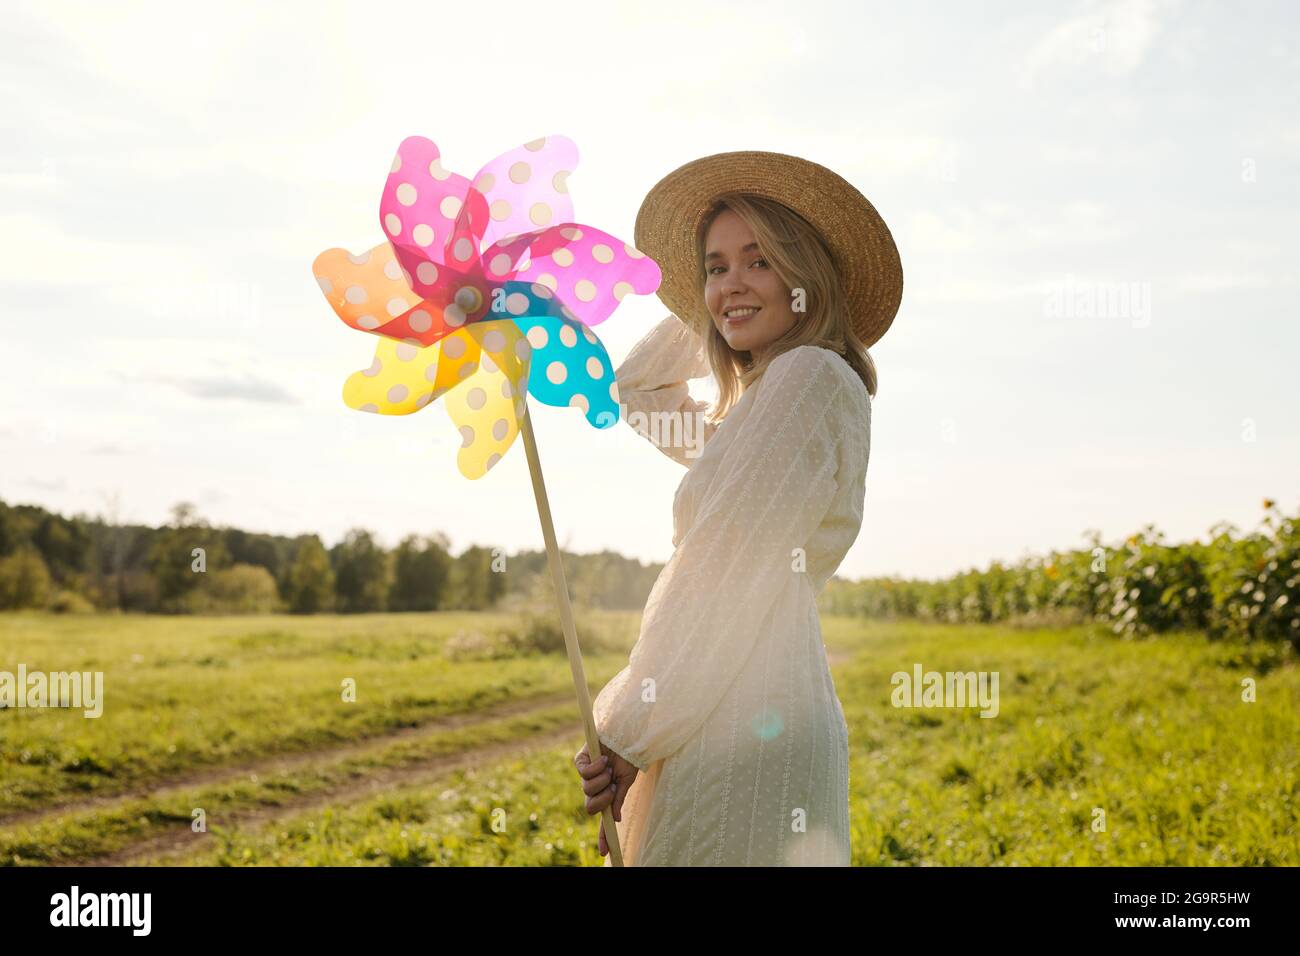 Back view of young elegant woman in hat and country style dress holding large polkadot whirligig while standing in front of green grass and road Stock Photo